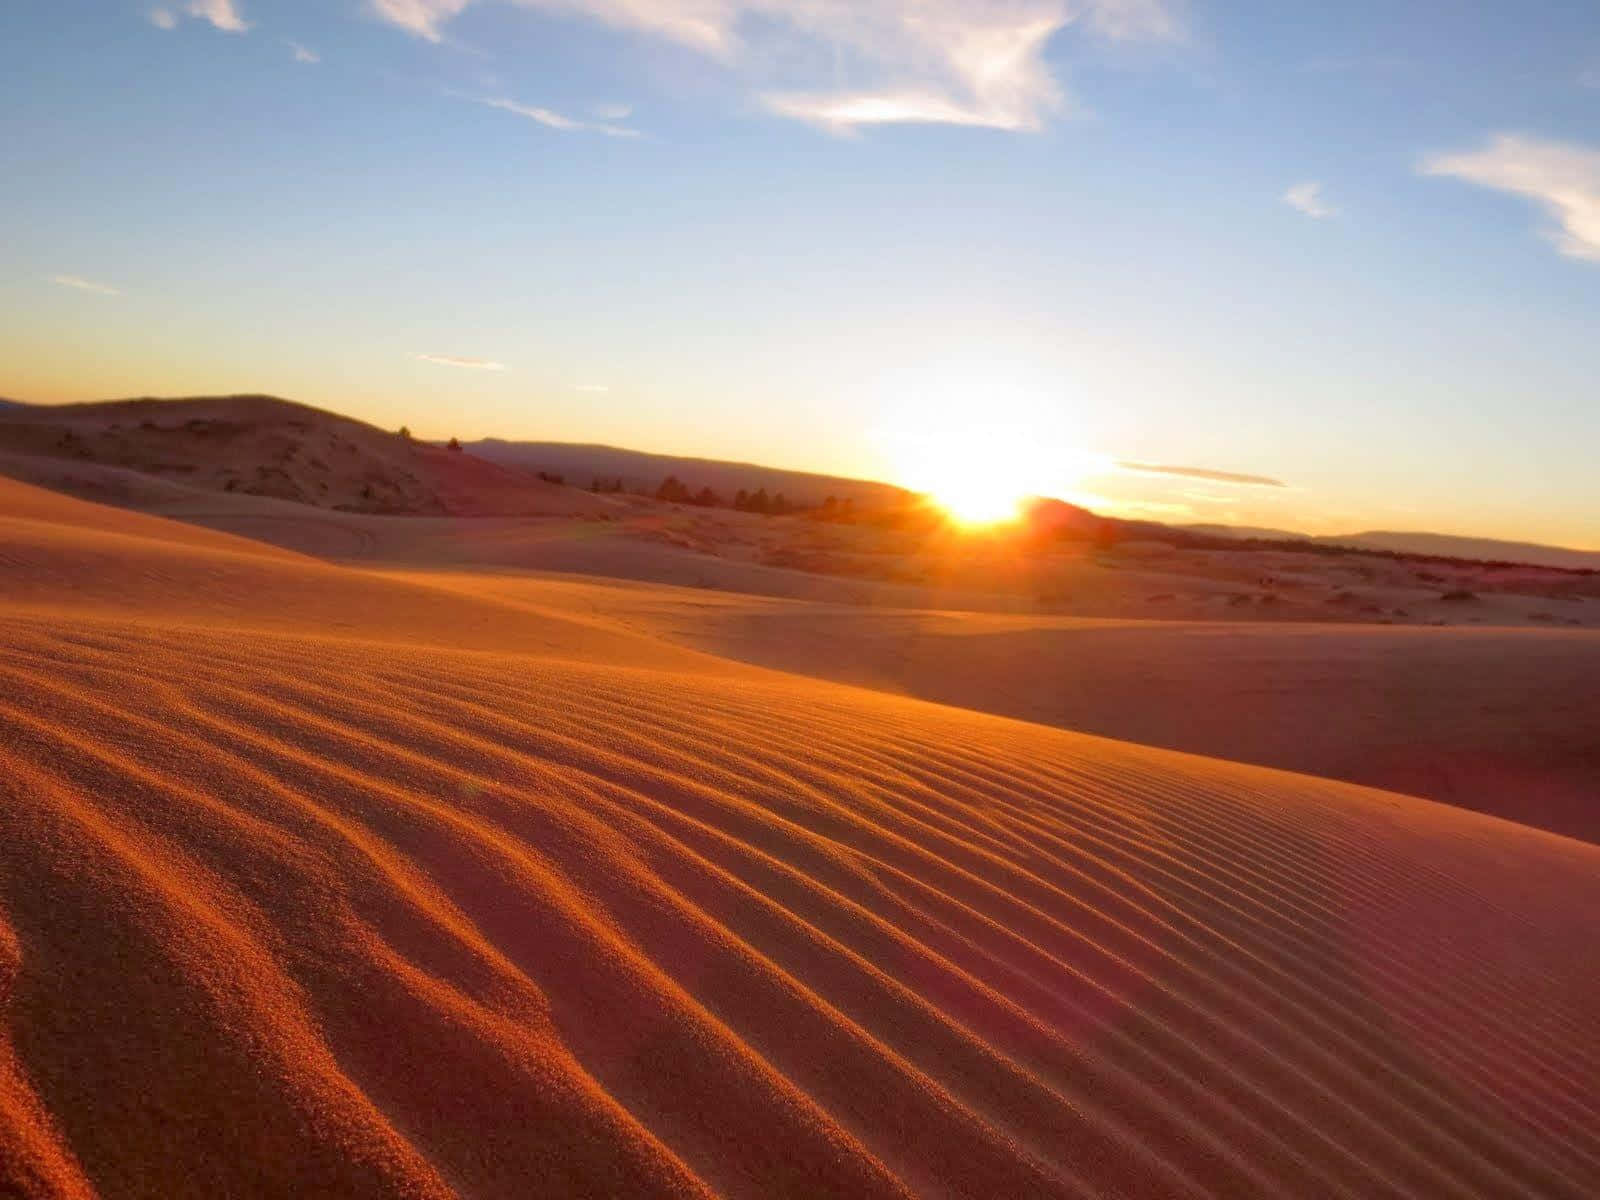 A Sunset Over A Sand Dune In The Desert